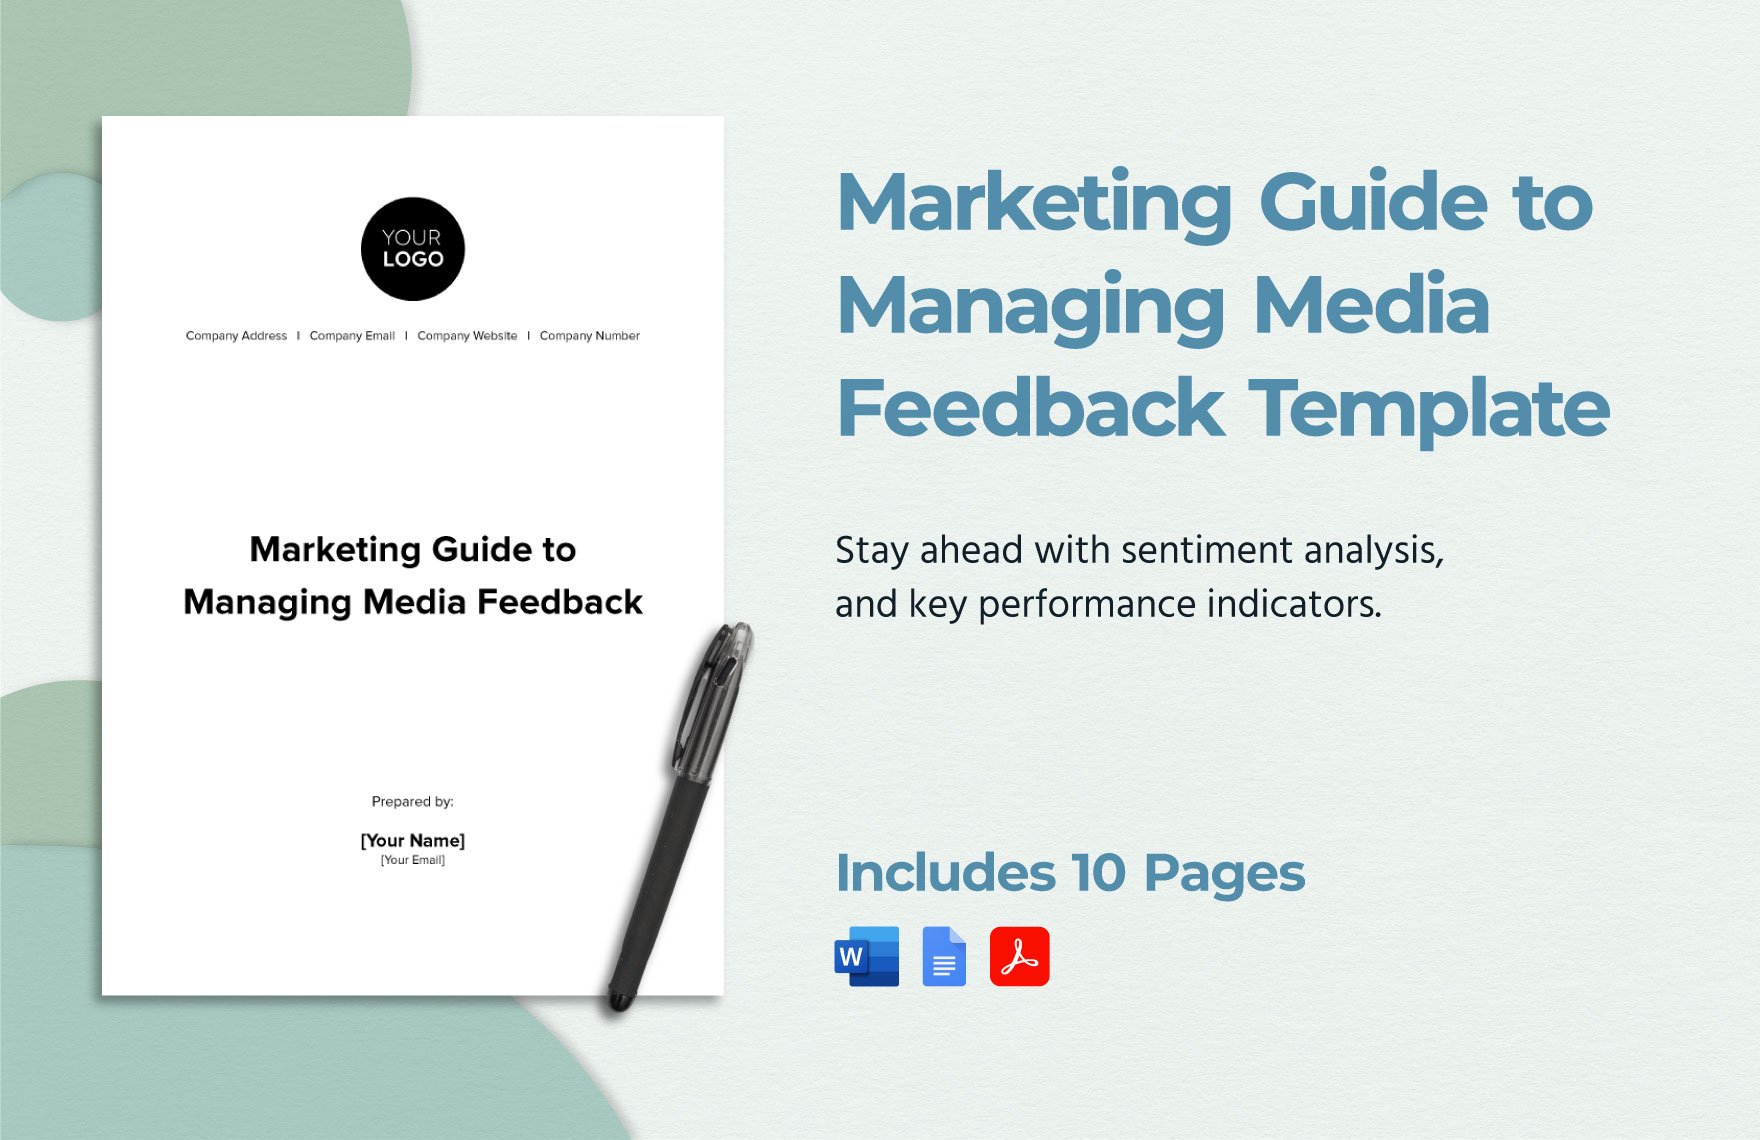 Marketing Guide to Managing Media Feedback Template